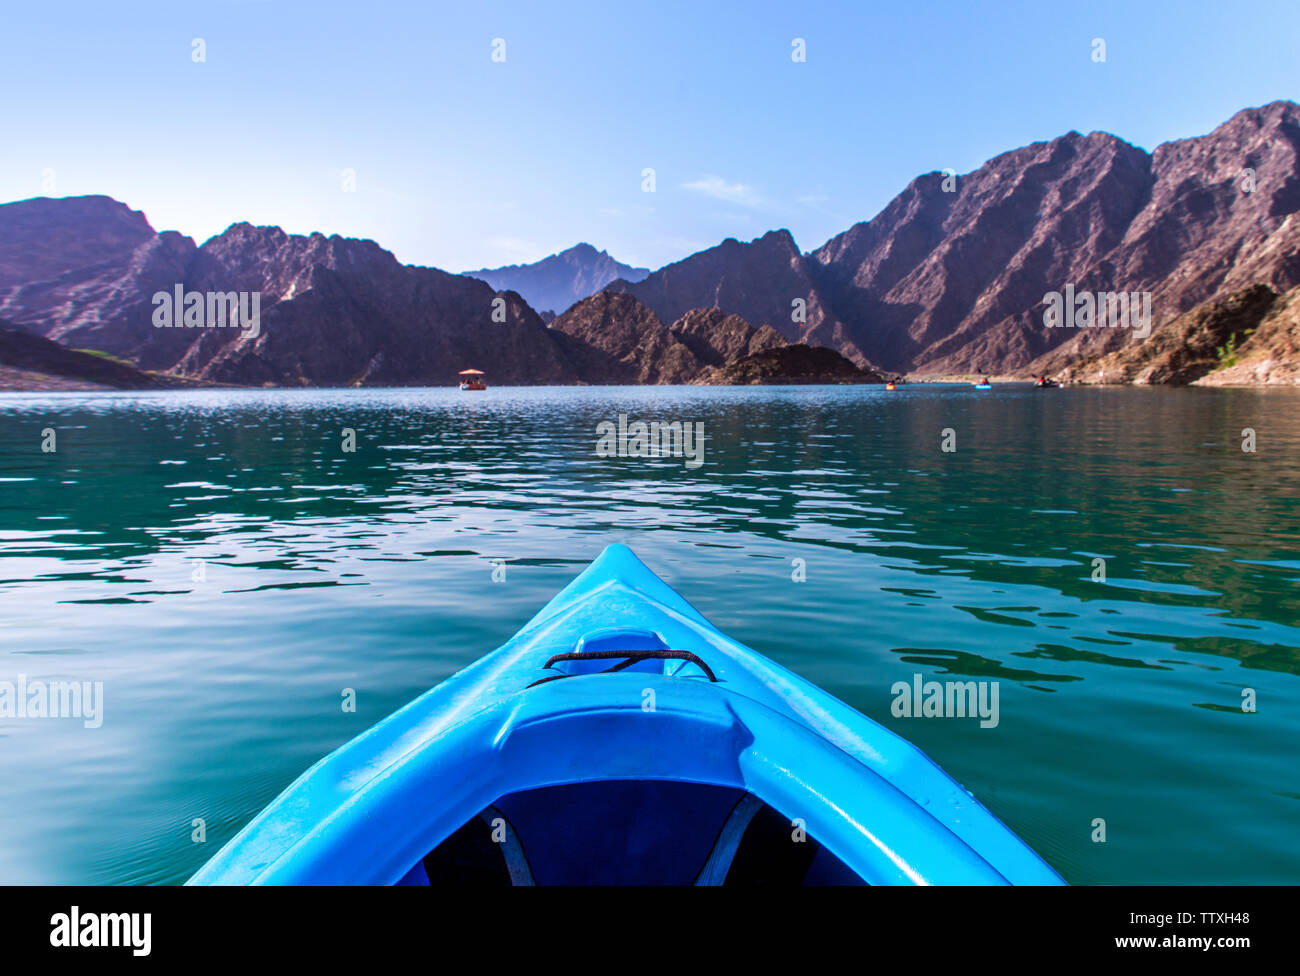 Boat ride kayaking at Hatta Dam awesome place to spend holidays beautiful mountain scenery Stock Photo